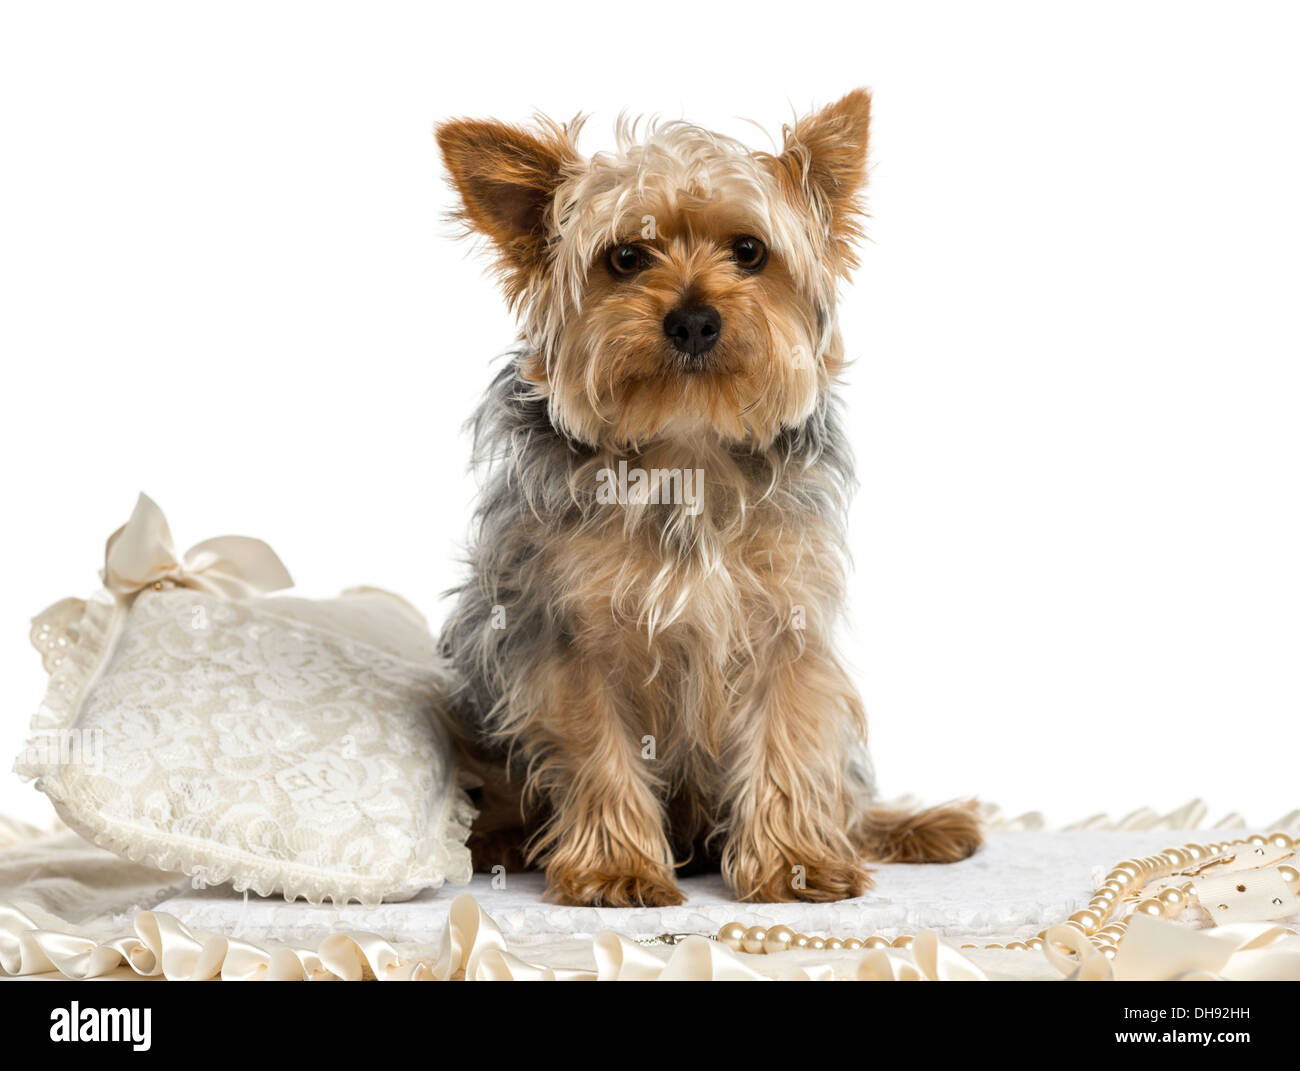 Yorkshire Terrier sitting on rug against white background Stock Photo